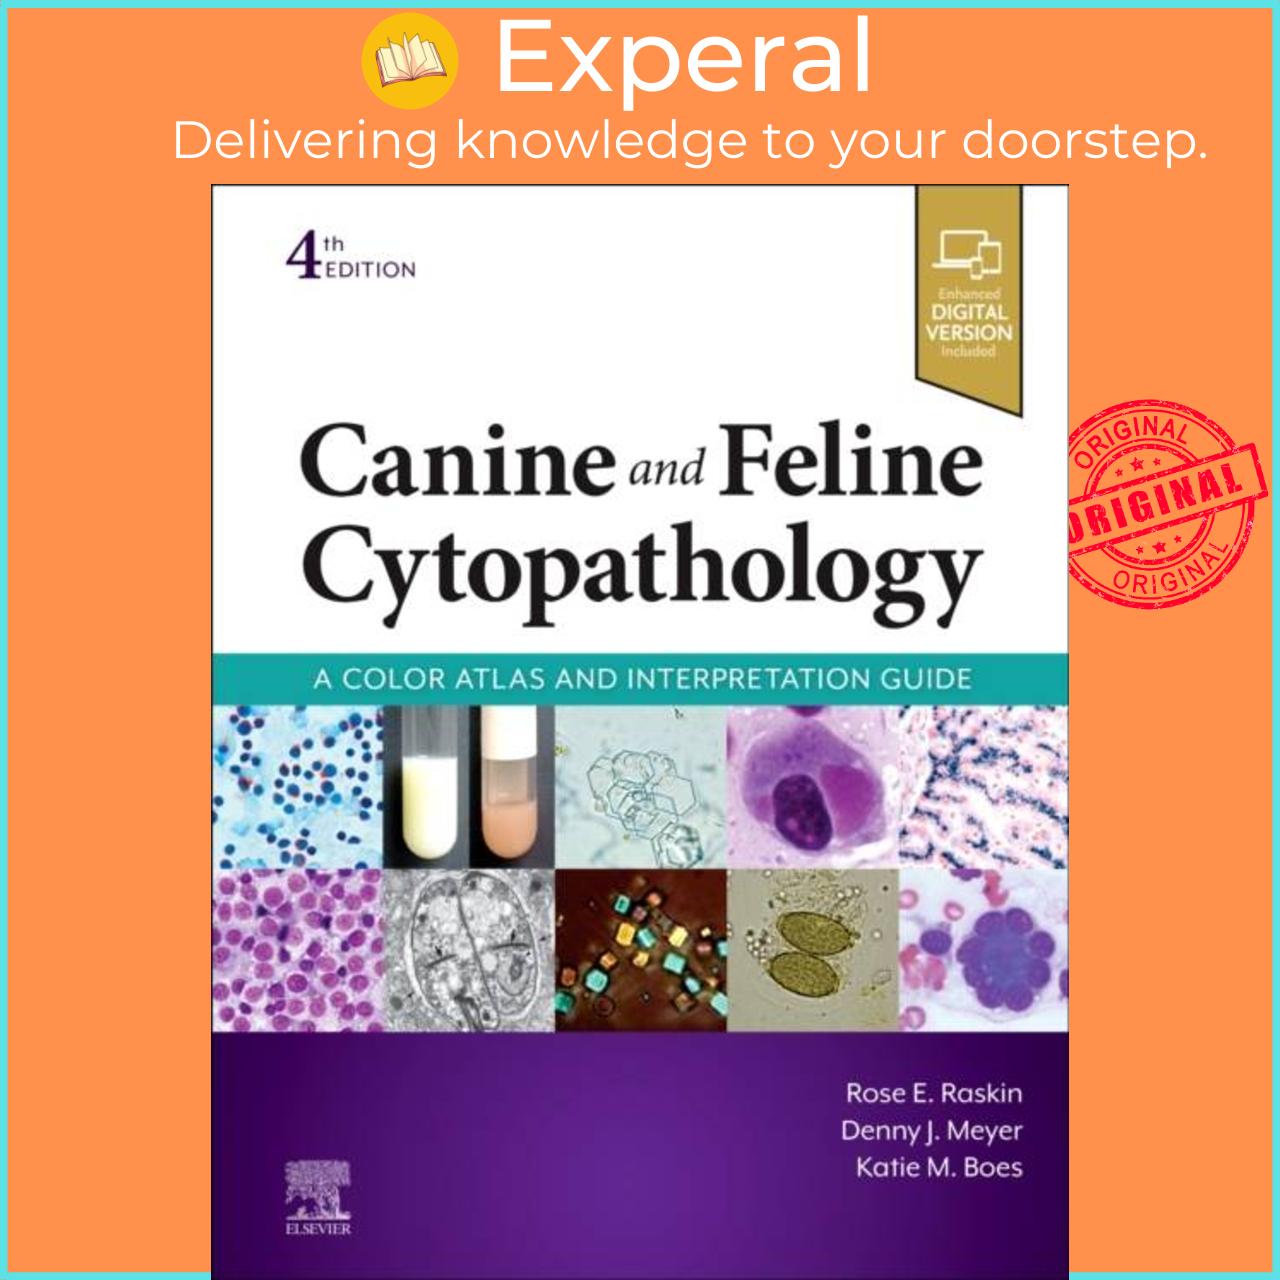 Hình ảnh Sách - Canine and Feline Cytopathology - A Color Atlas and Interpretation Guide by Katie. M Boes (UK edition, hardcover)